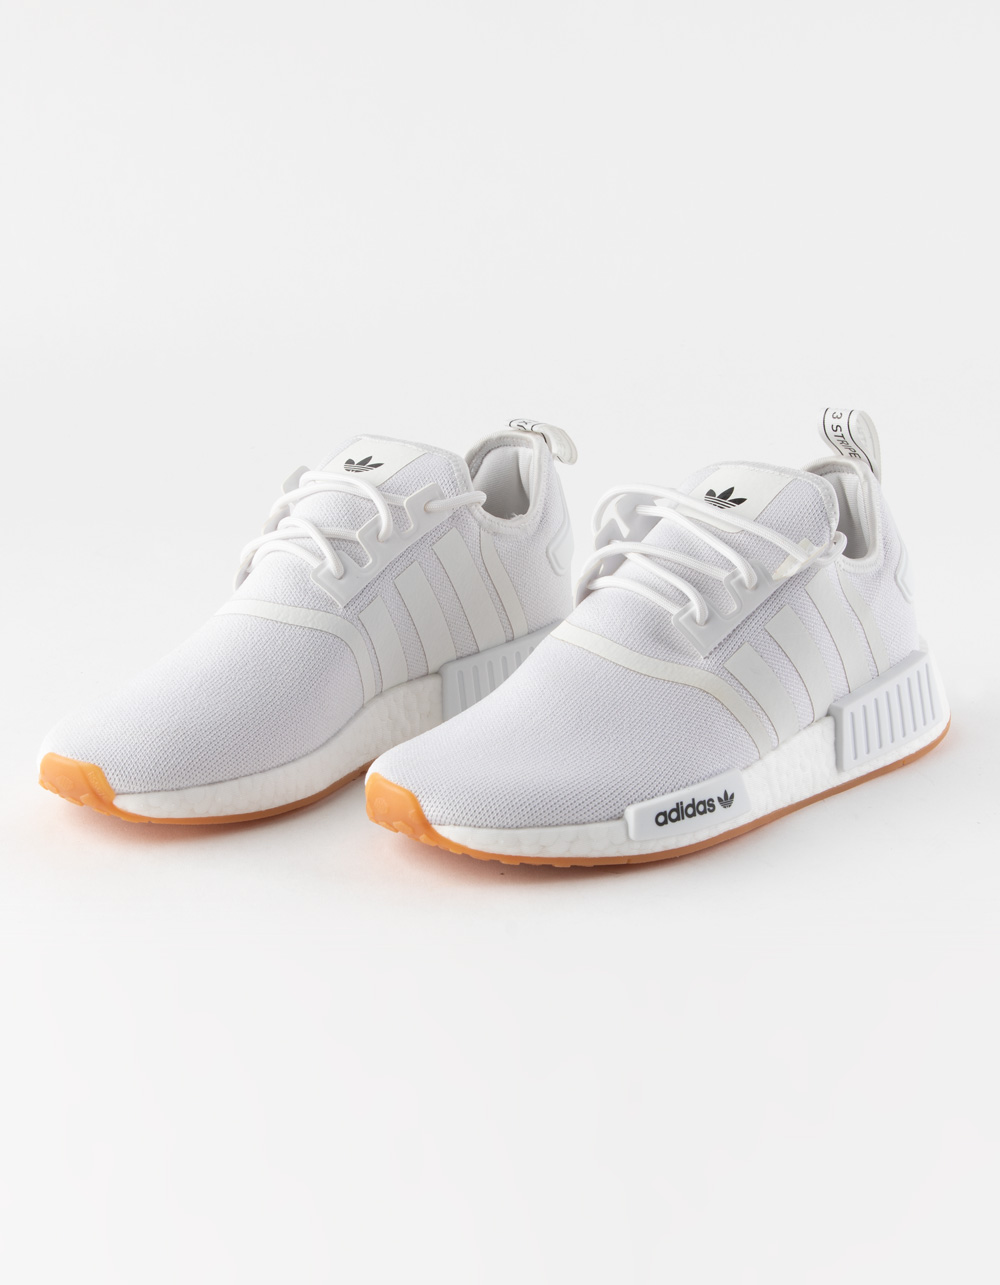 ADIDAS NMD R1 PrimeBlue Mens Shoes - brown | Tillys